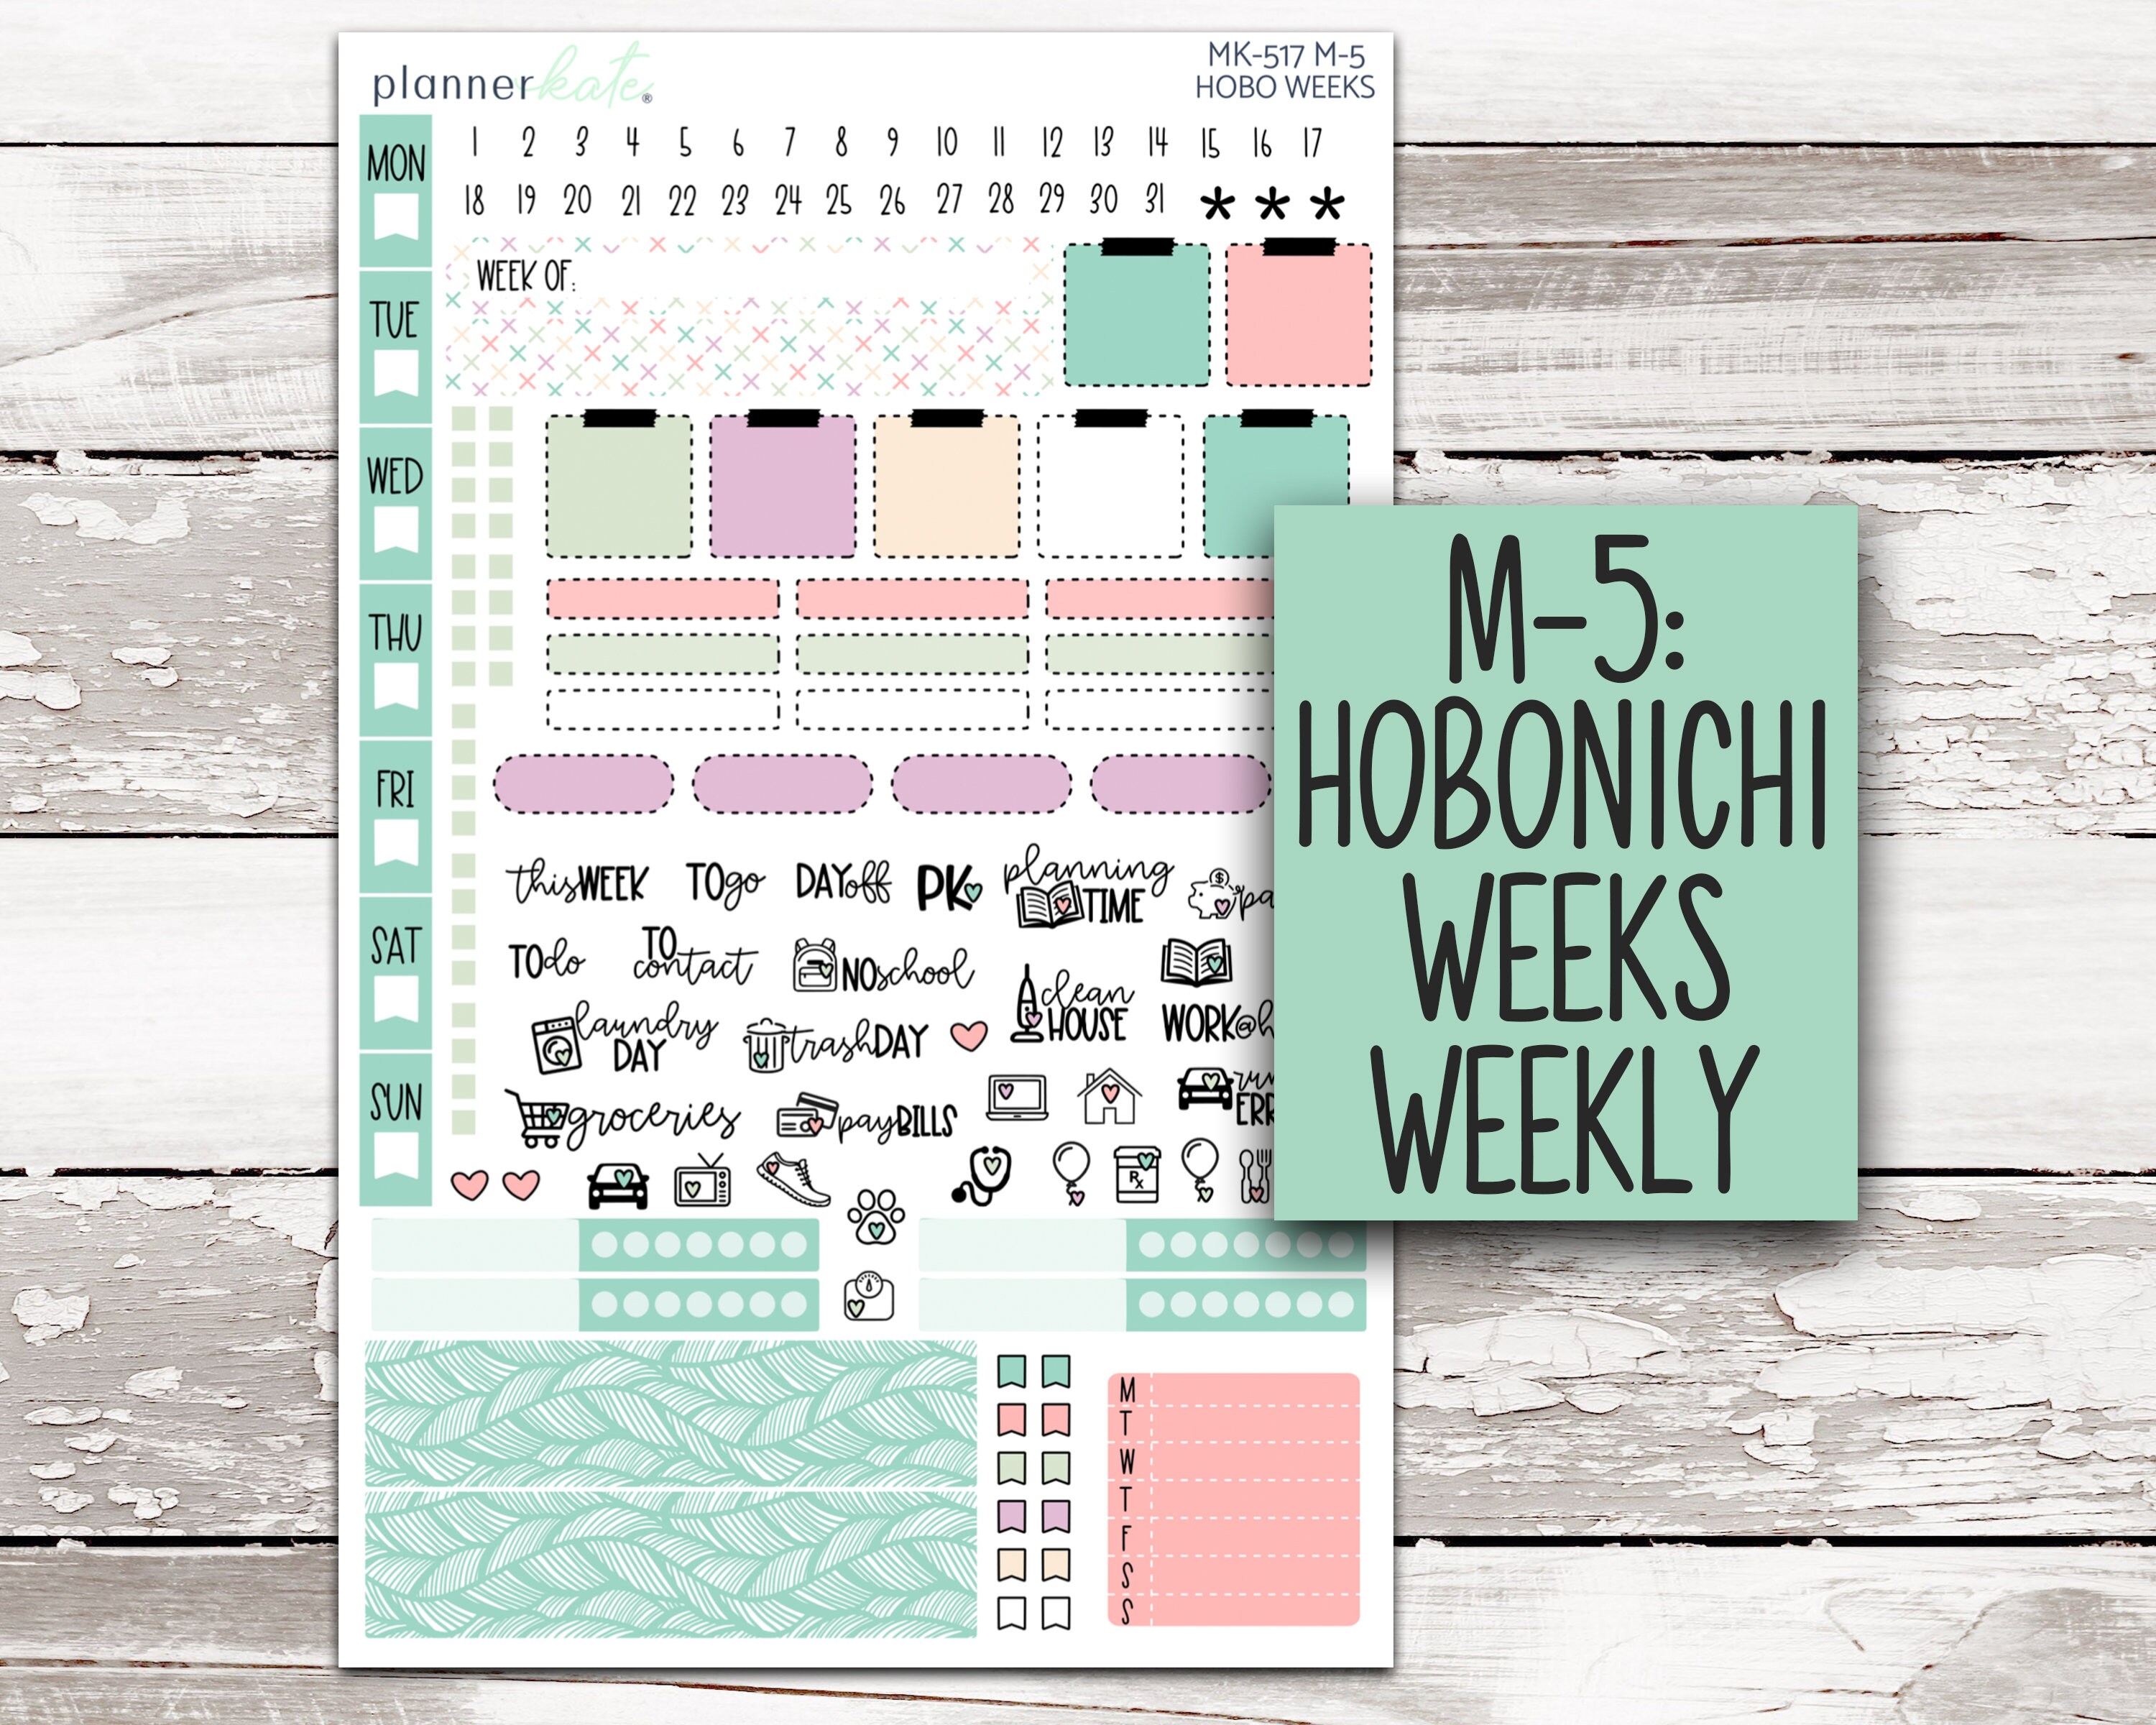 DOODLE-23-26 HOLIDAY Planner Stickers Standard Mini Size S-1569 S